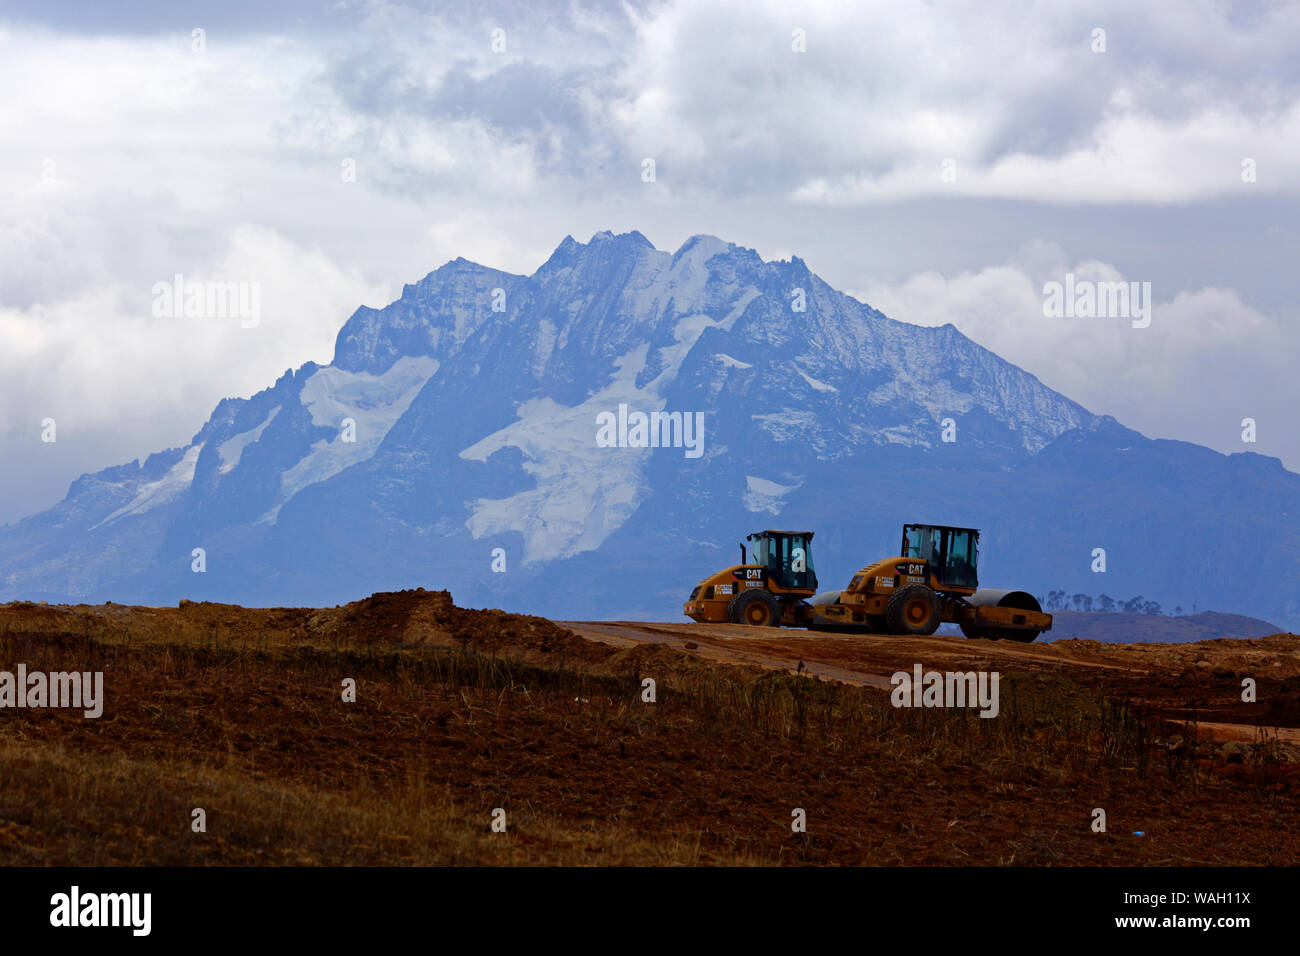 Heavy machinery working moving earth, the start of construction at the site of a new international airport at Chinchero for Cusco and Machu Picchu. In the background  is Mt Chicon, one of the peaks of the Cordillera Urubamba mountain range. Cusco Region, Peru Stock Photo